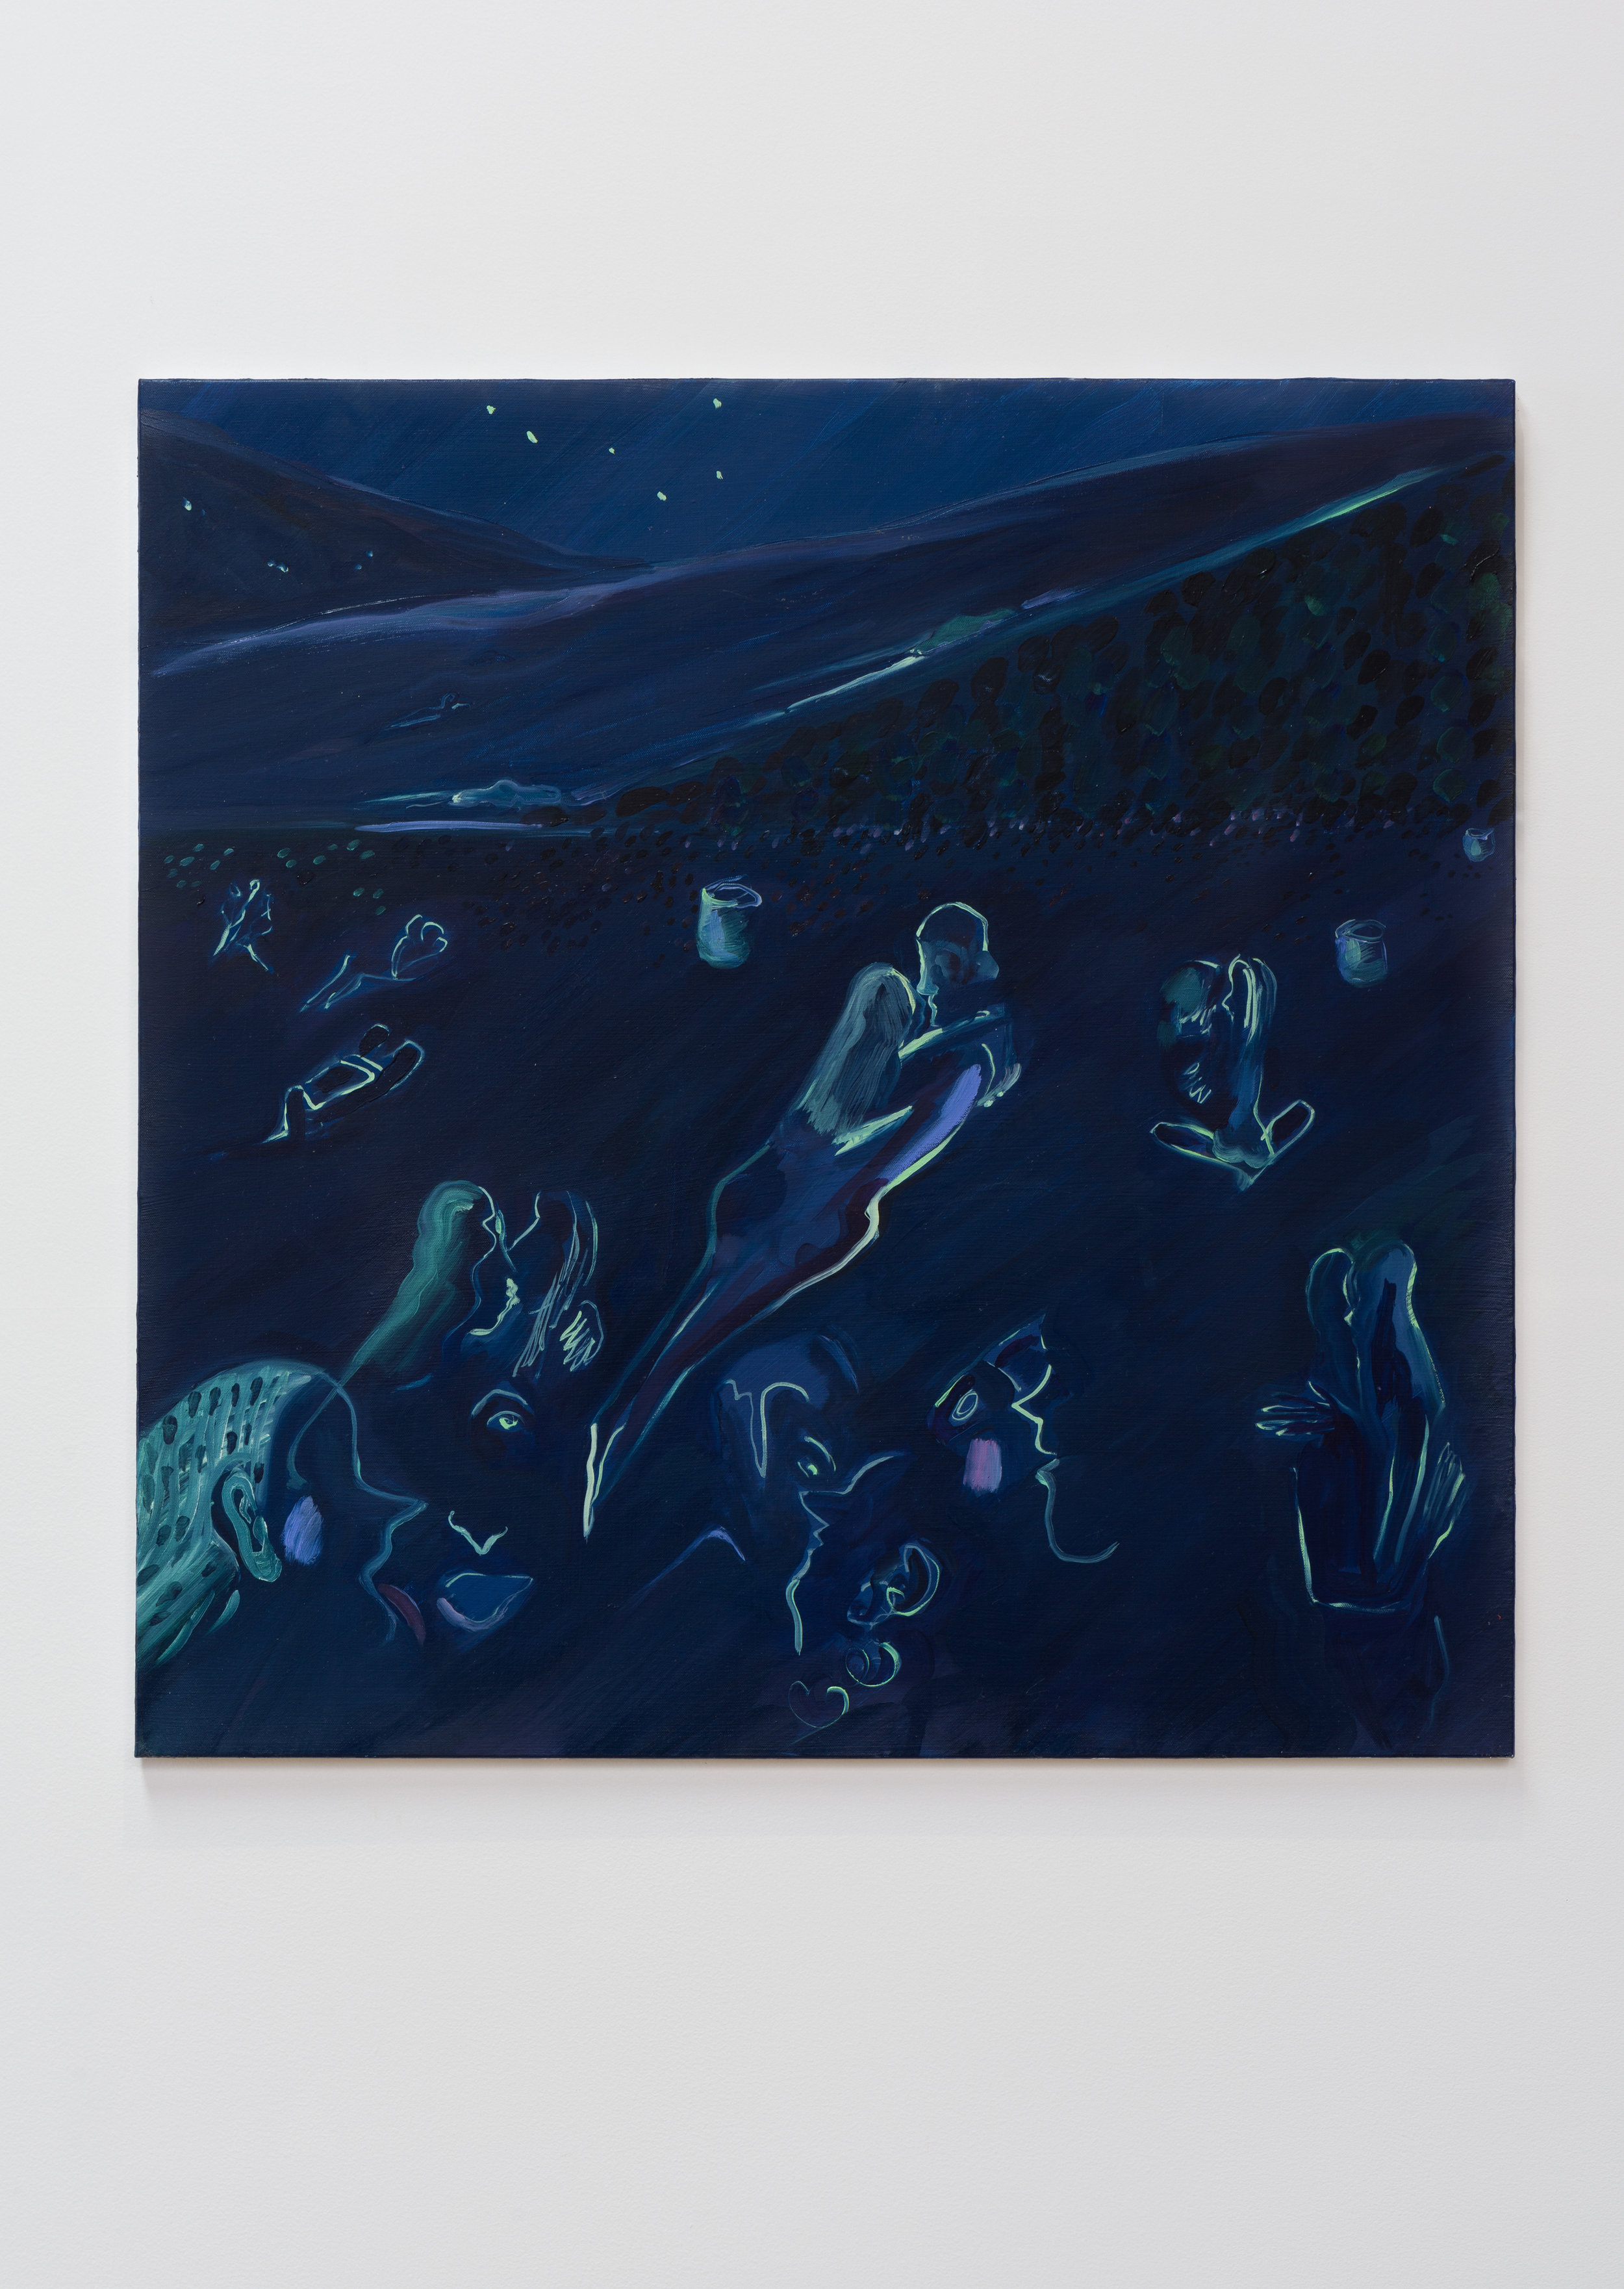   Kira Shewfelt    Night Hustle / Big Dipper - only star I know   2016 Oil on canvas 36 x 36 inches 